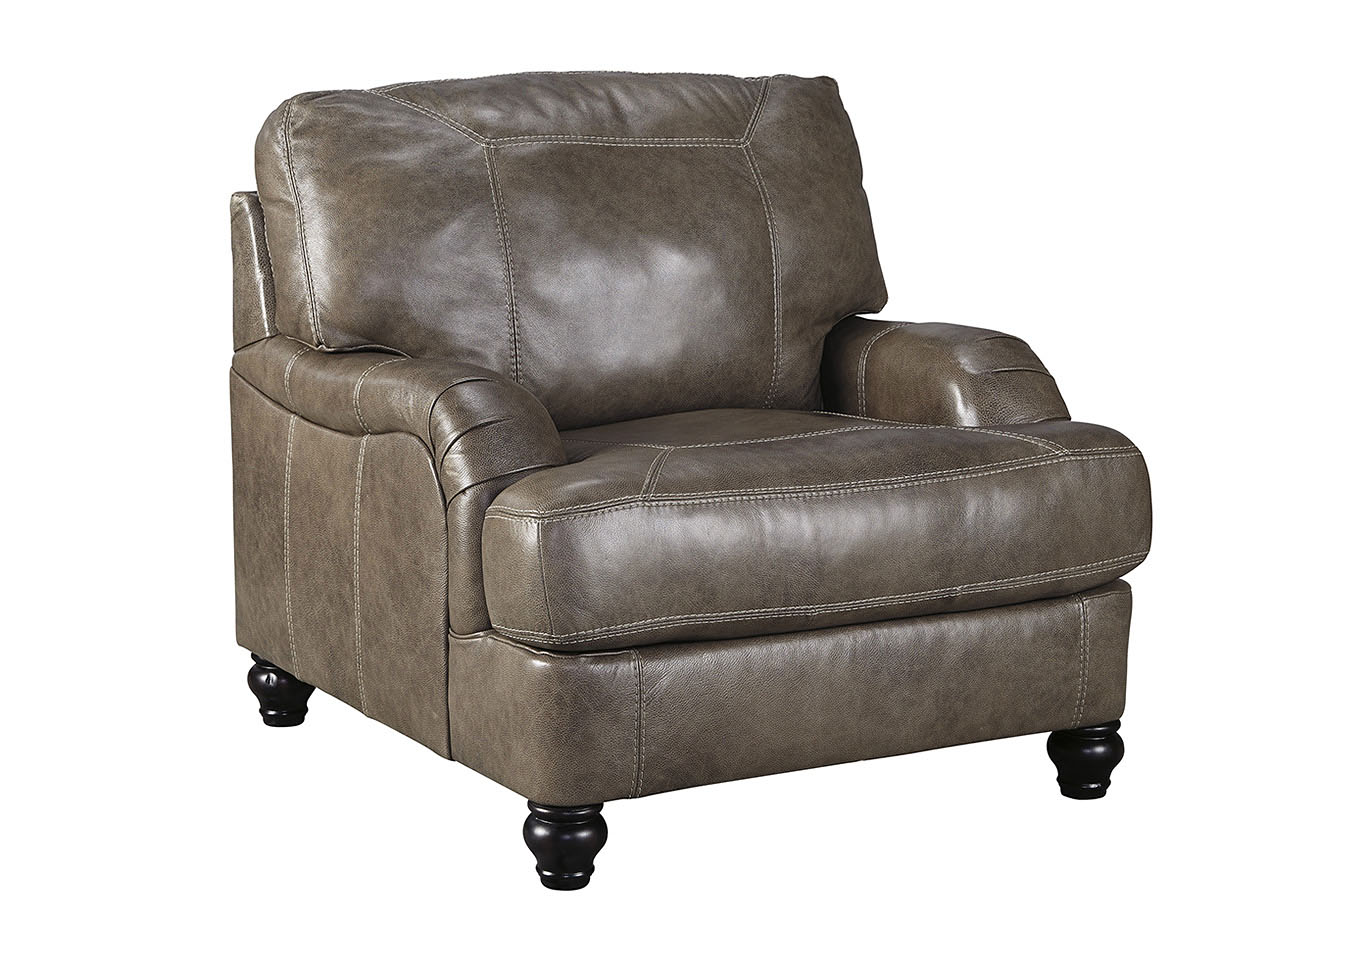 Regal House Furniture Outlet New Bedford Ma Kannerdy Quarry Chair